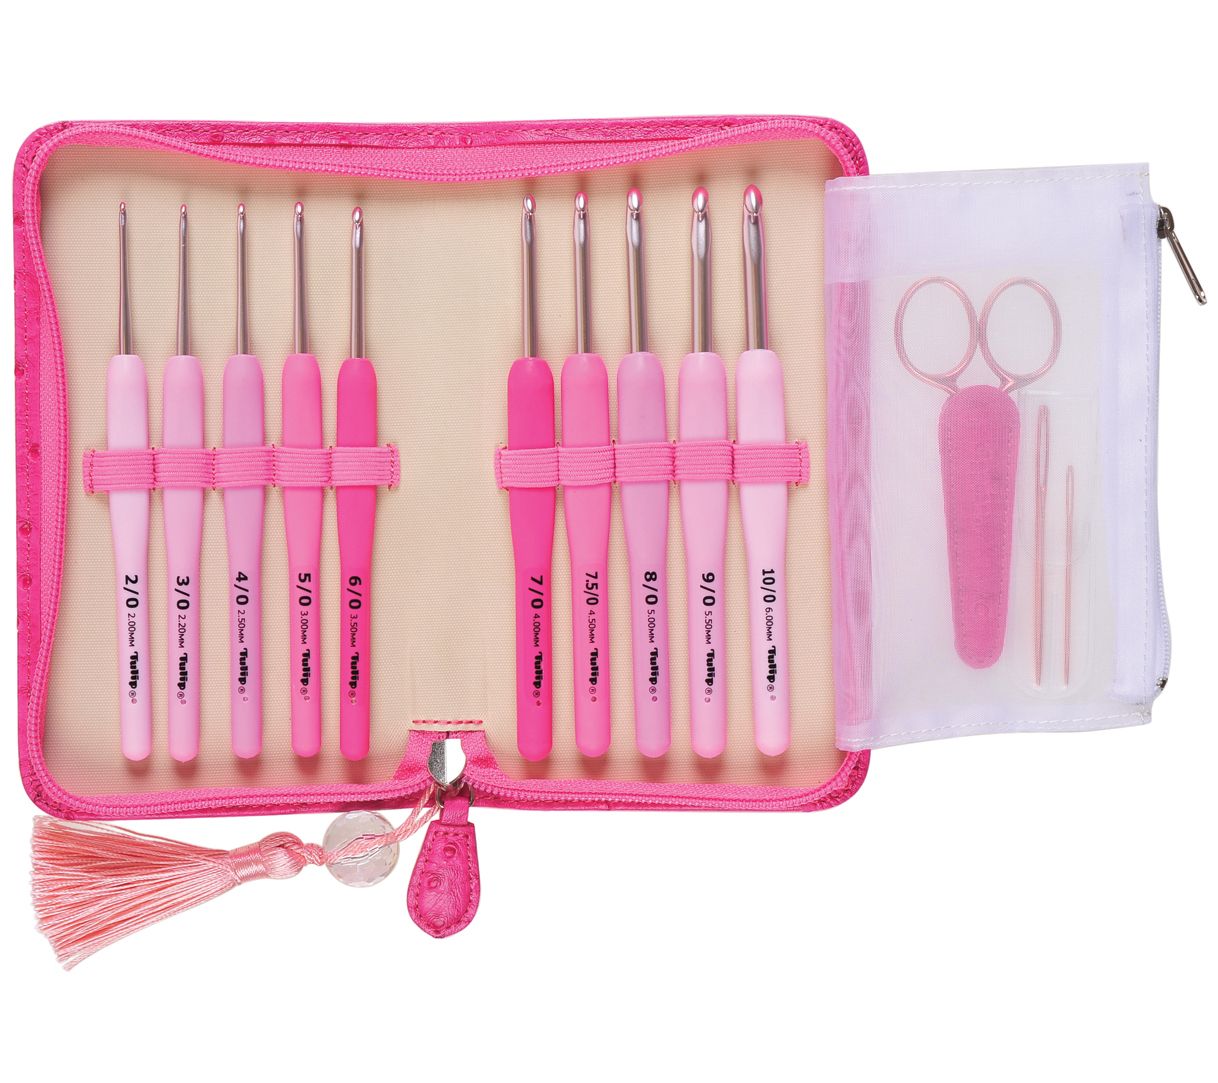 Tulip is launching PINK ETIMO candy Cushion grip crochet hook set